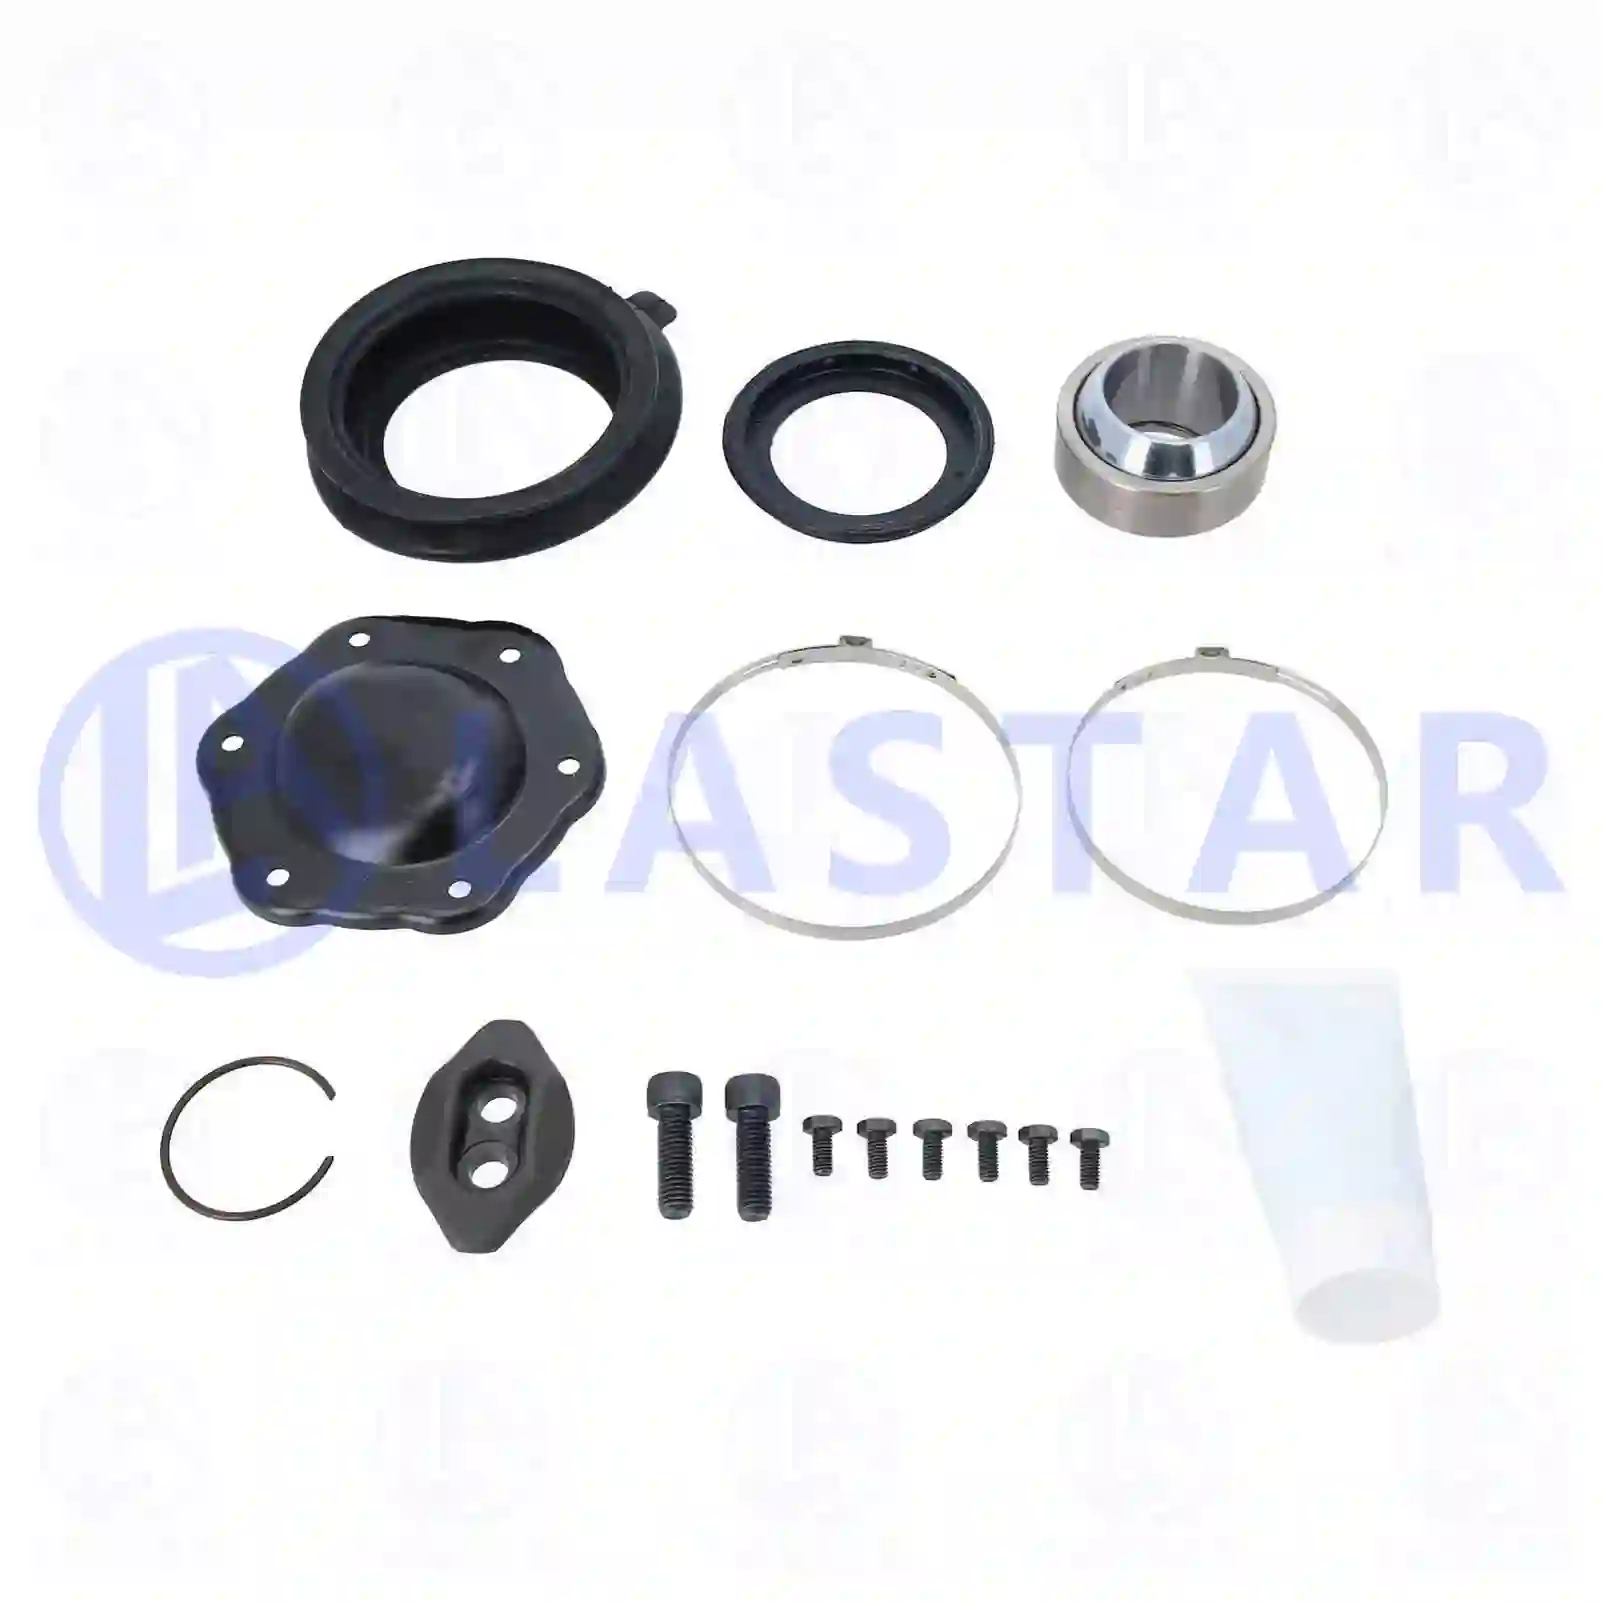 Repair kit, v-stay, 77727759, 7422238527, 21196275, 22238527 ||  77727759 Lastar Spare Part | Truck Spare Parts, Auotomotive Spare Parts Repair kit, v-stay, 77727759, 7422238527, 21196275, 22238527 ||  77727759 Lastar Spare Part | Truck Spare Parts, Auotomotive Spare Parts